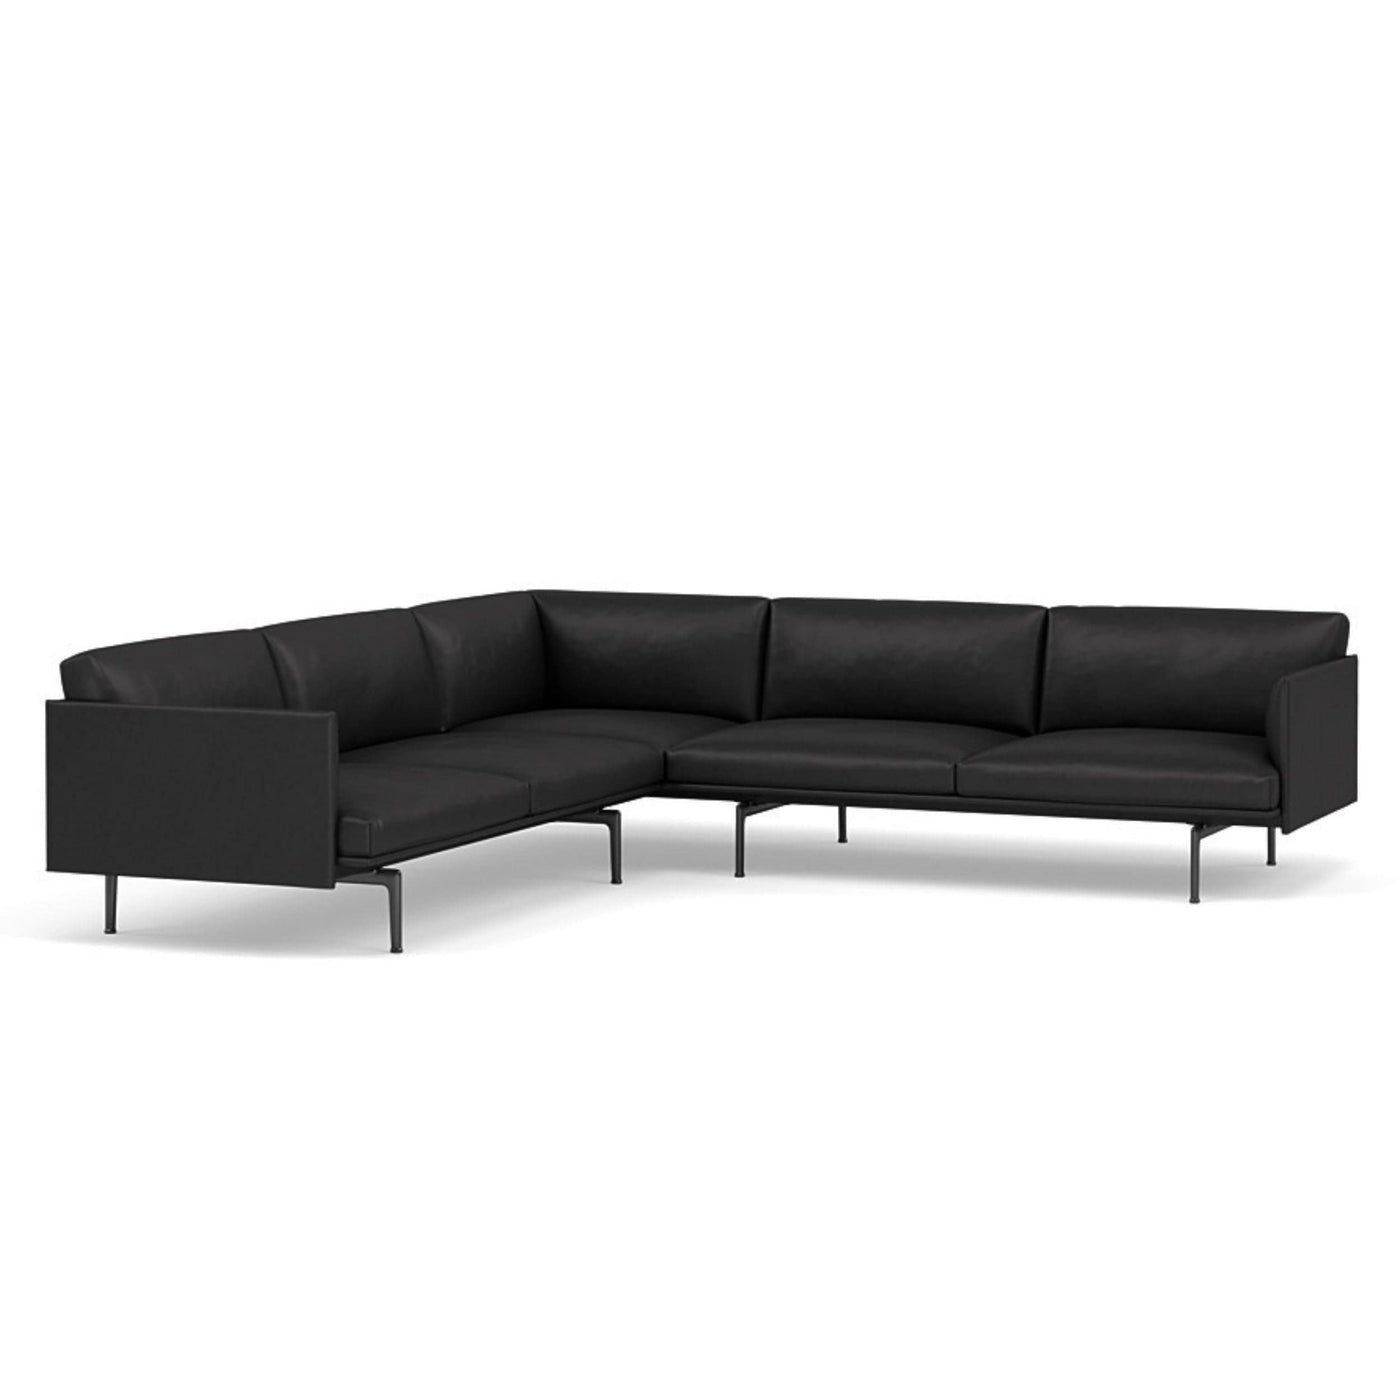 muuto outline corner sofa in black refine leather and black legs. Made to order from someday designs. #colour_black-refine-leather